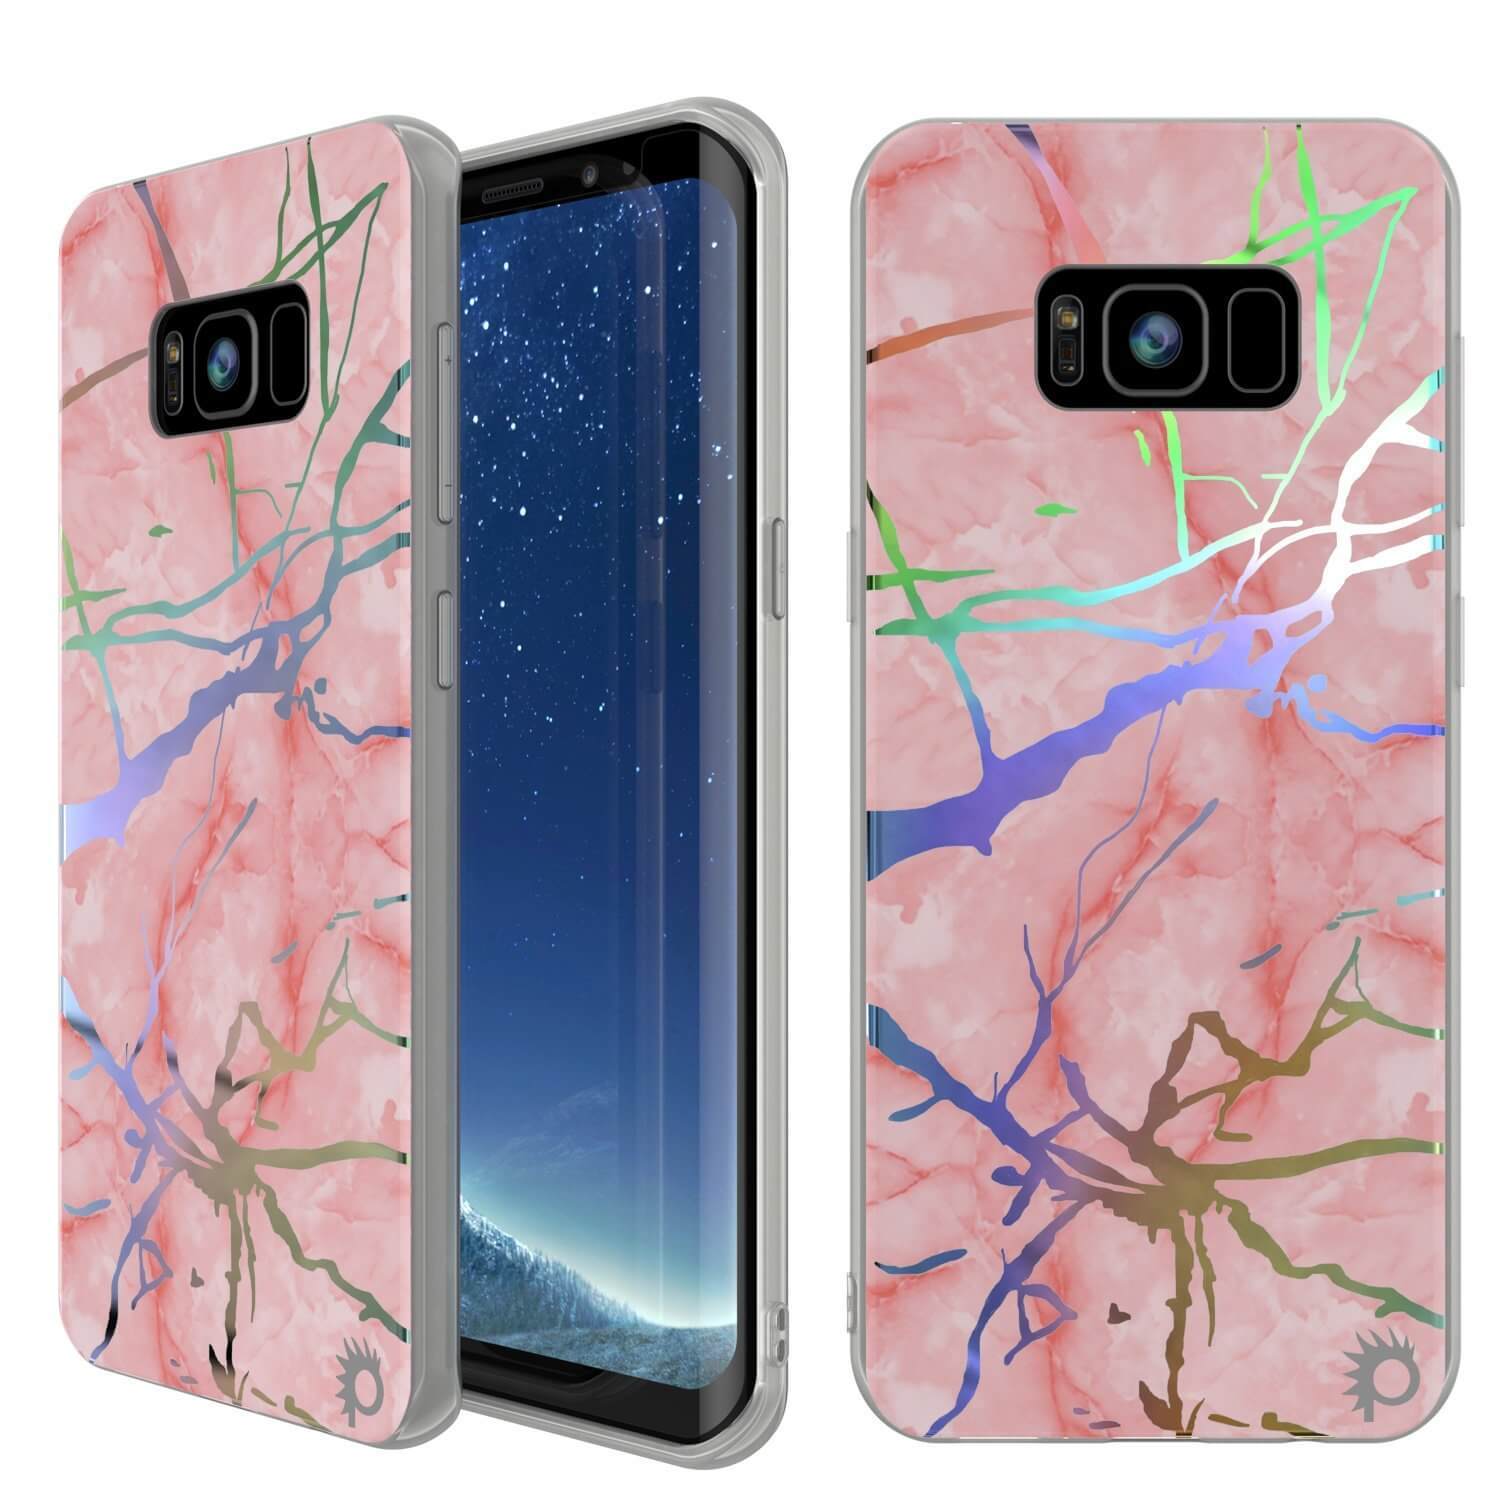 Punkcase Galaxy S8+ PLUS Marble Case, Protective Full Body Cover W/PunkShield Screen Protector (Rose Mirage)